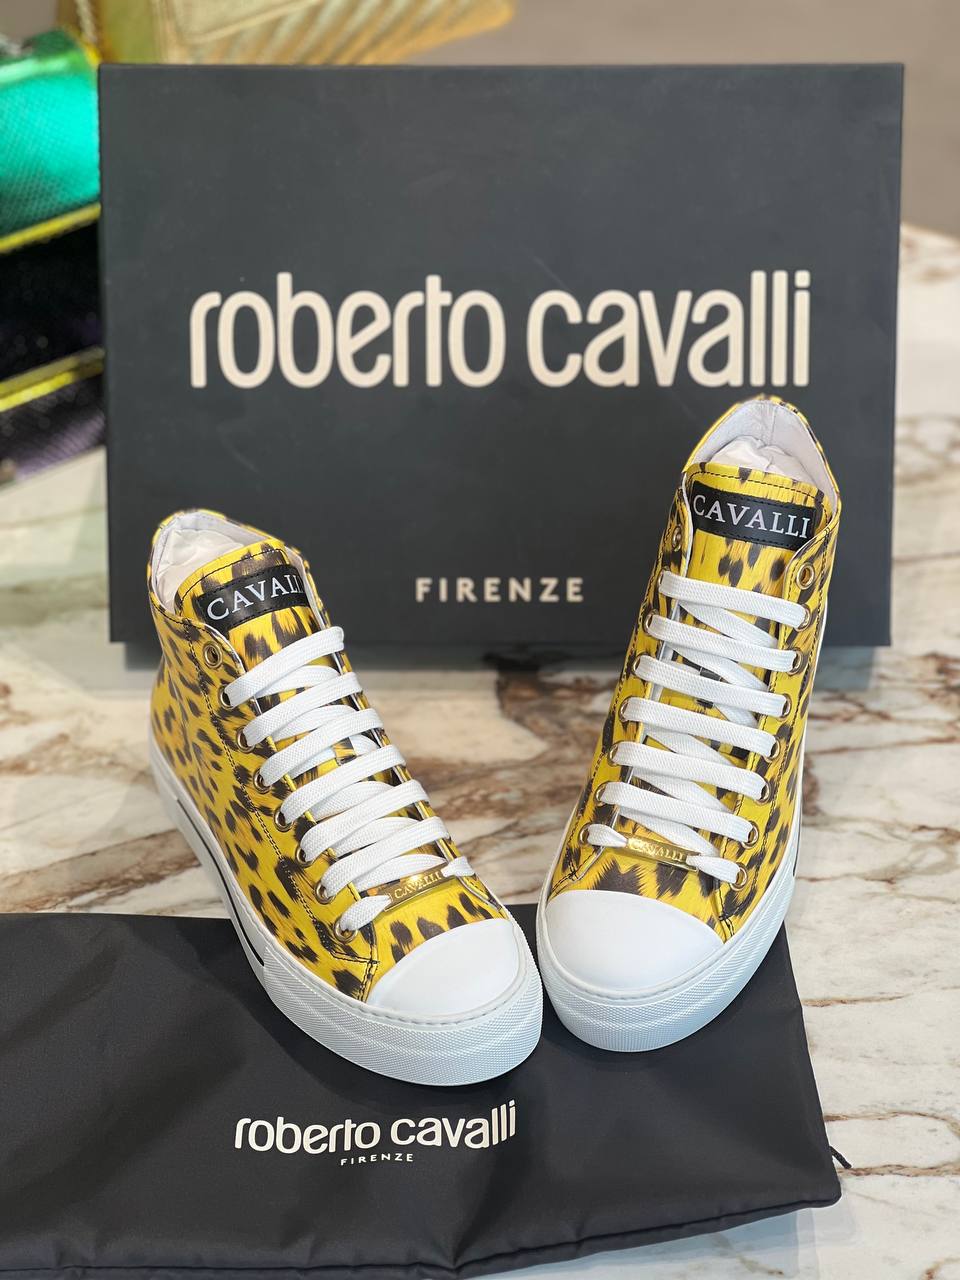 Roberto Cavalli Outlets 5023